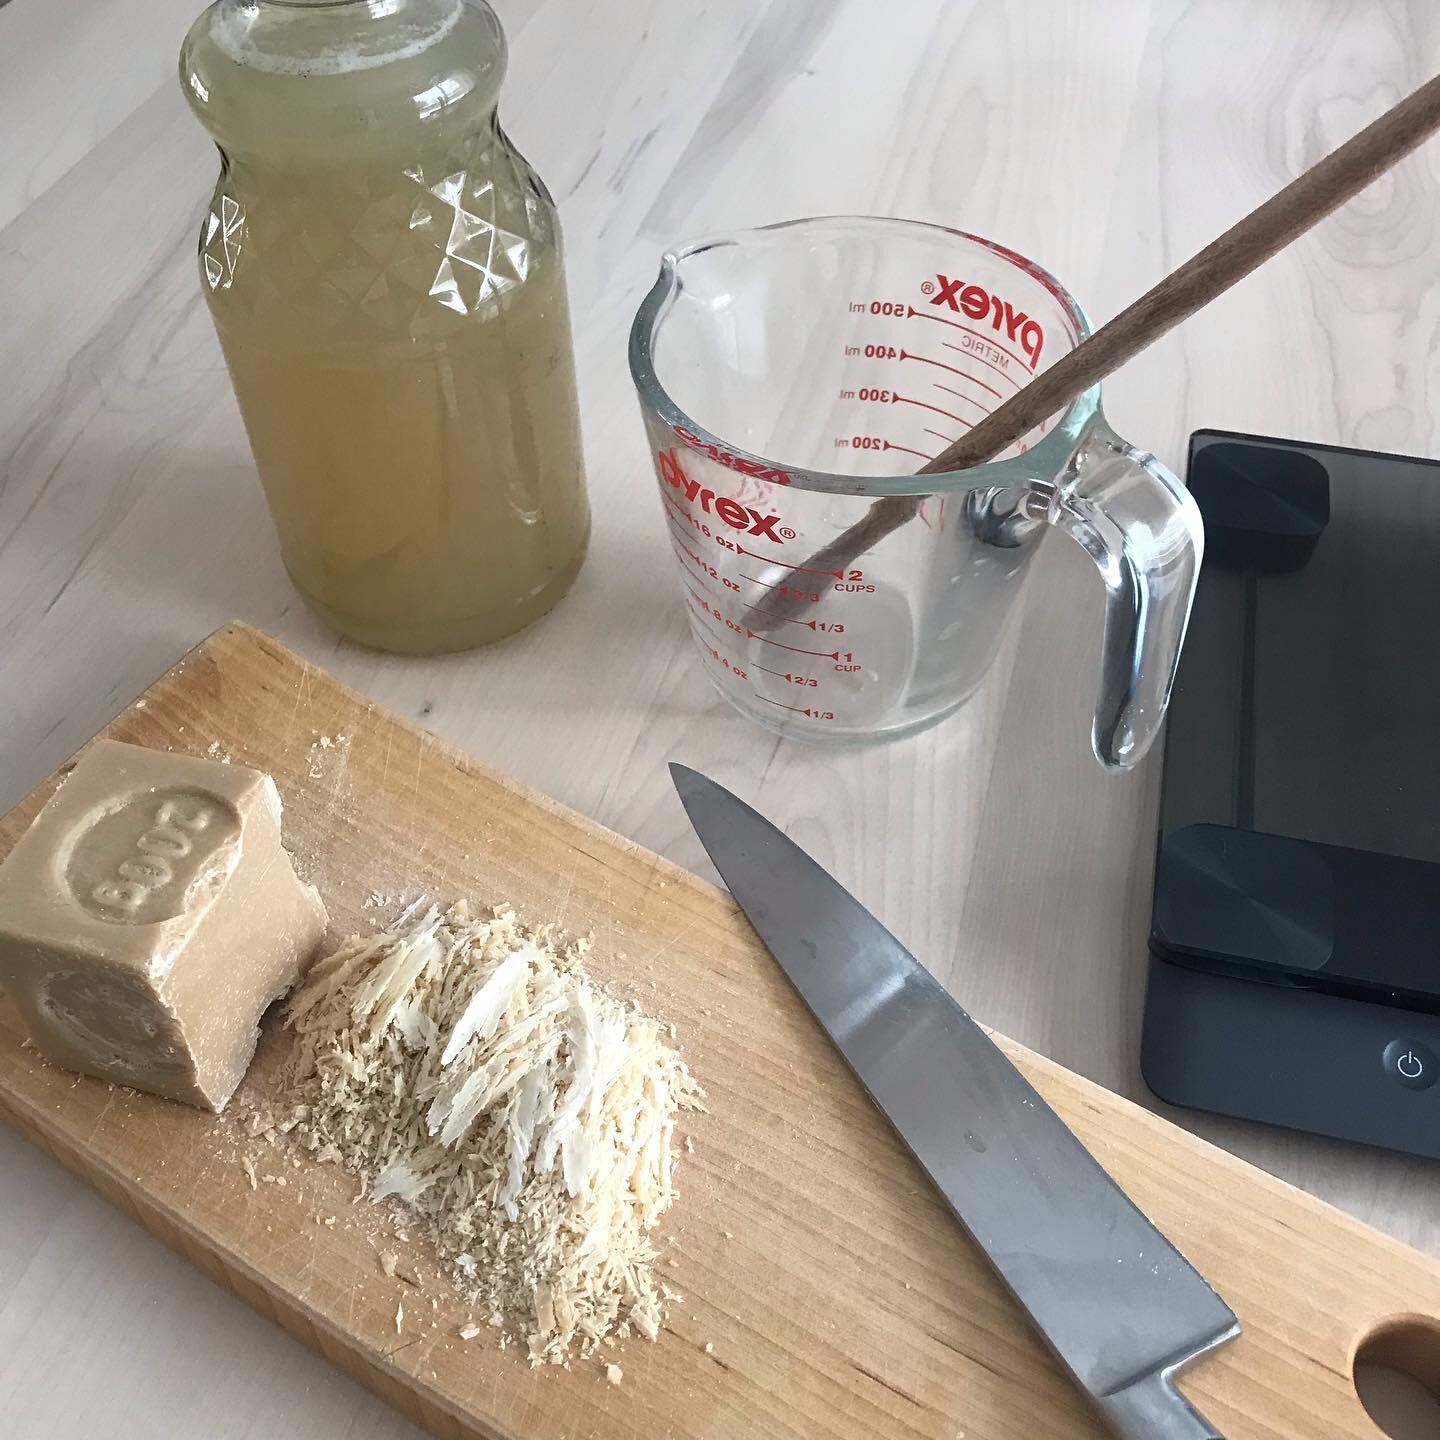 No more wasteful plastic bottles or chemical laundry detergent! Make your own with our 200g beige Marseille soap (72% sunflower oil sourced in Europe). For $12 you can make nearly 7 litres of detergent. The soap itself is also an effective stain remo